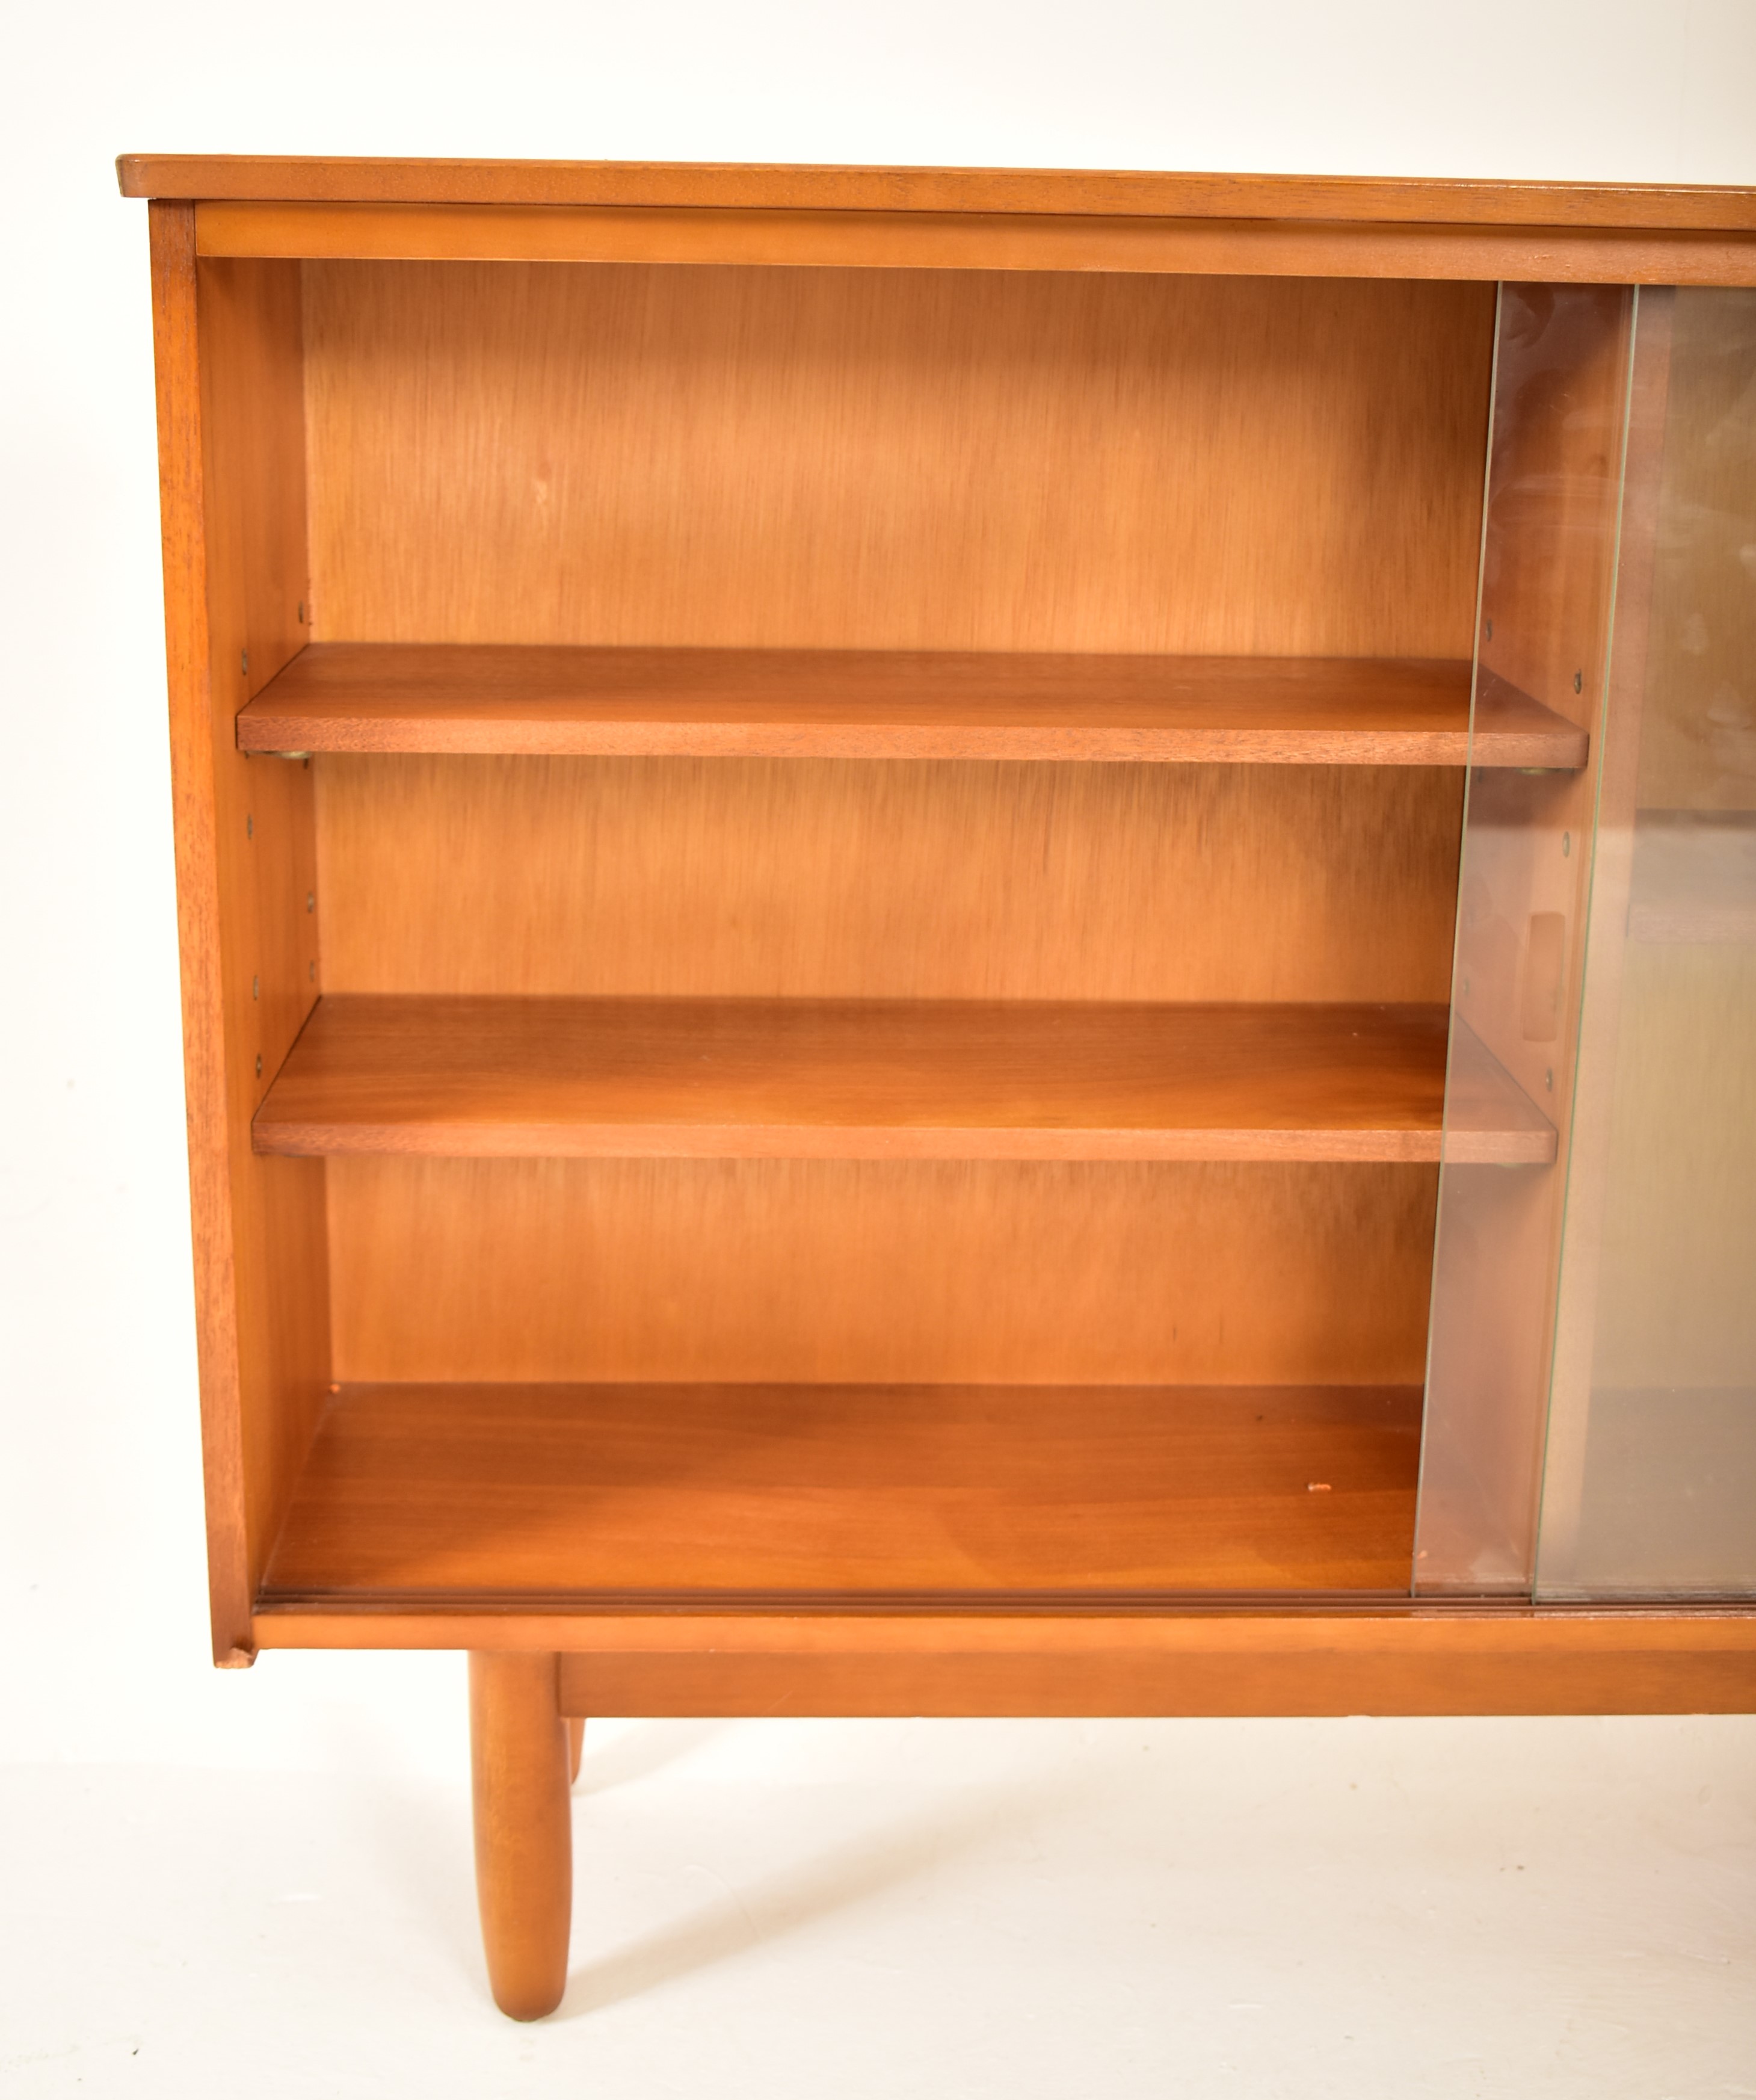 MID CENTURY TEAK AND GLASS DISPLAY CABINET / BOOKCASE - Image 3 of 6